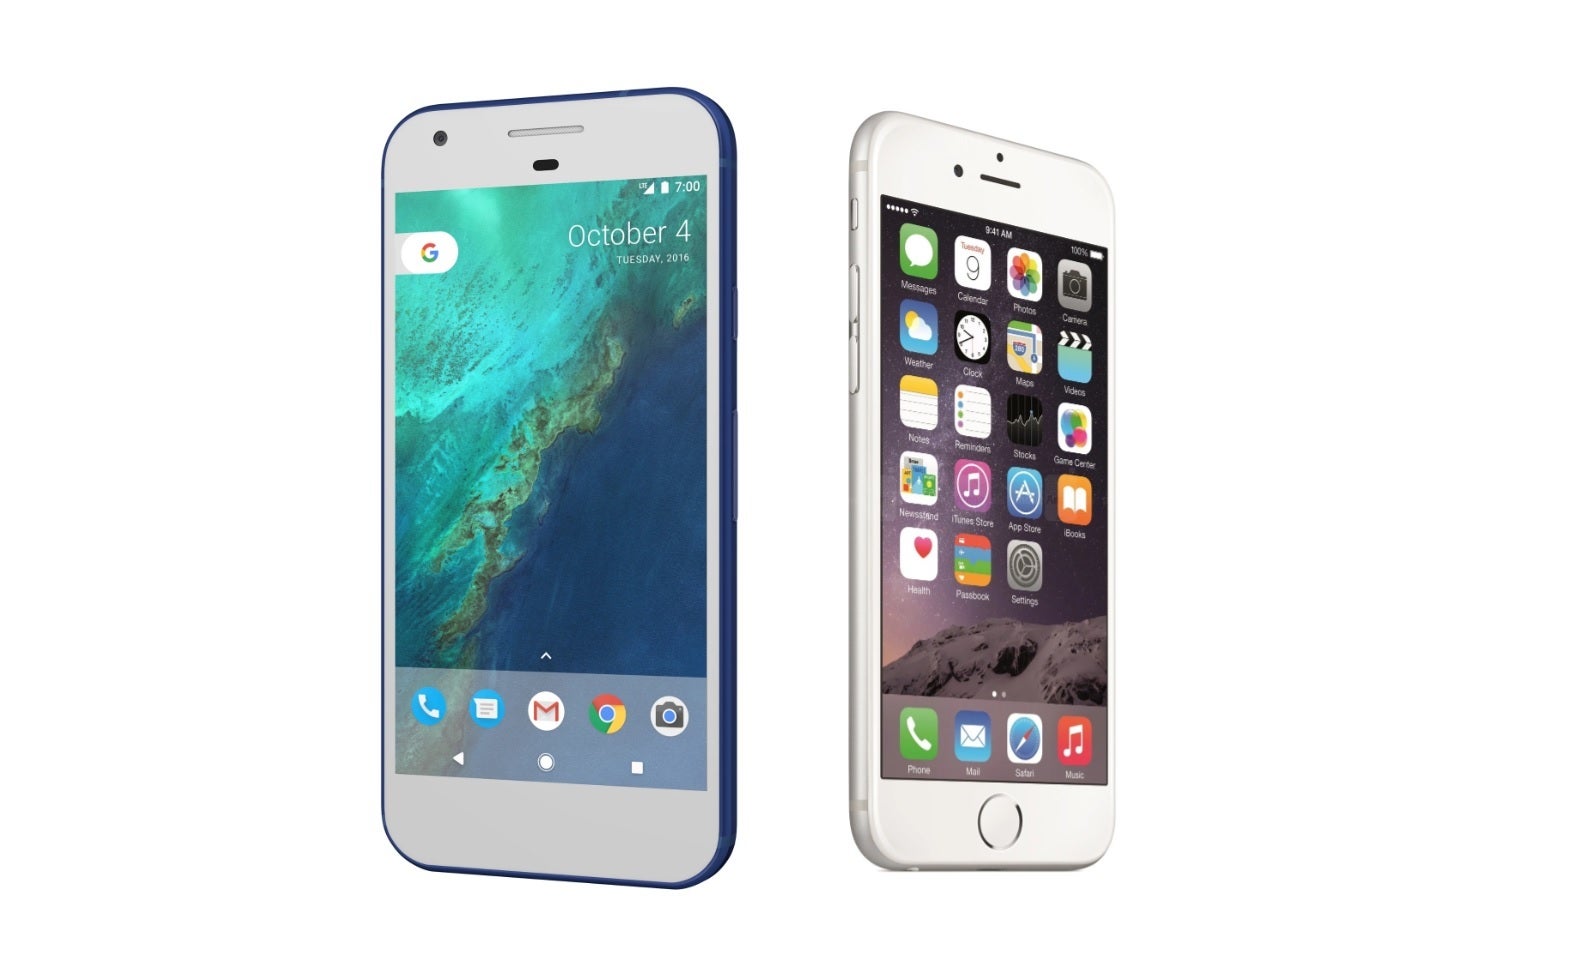 The first Google Pixel (left) and the iPhone 6 (right) - While indecisive Google is playing catch-up with Apple, Samsung plows ahead (Pixel Fold, Pixel Watch, Pixel 6)